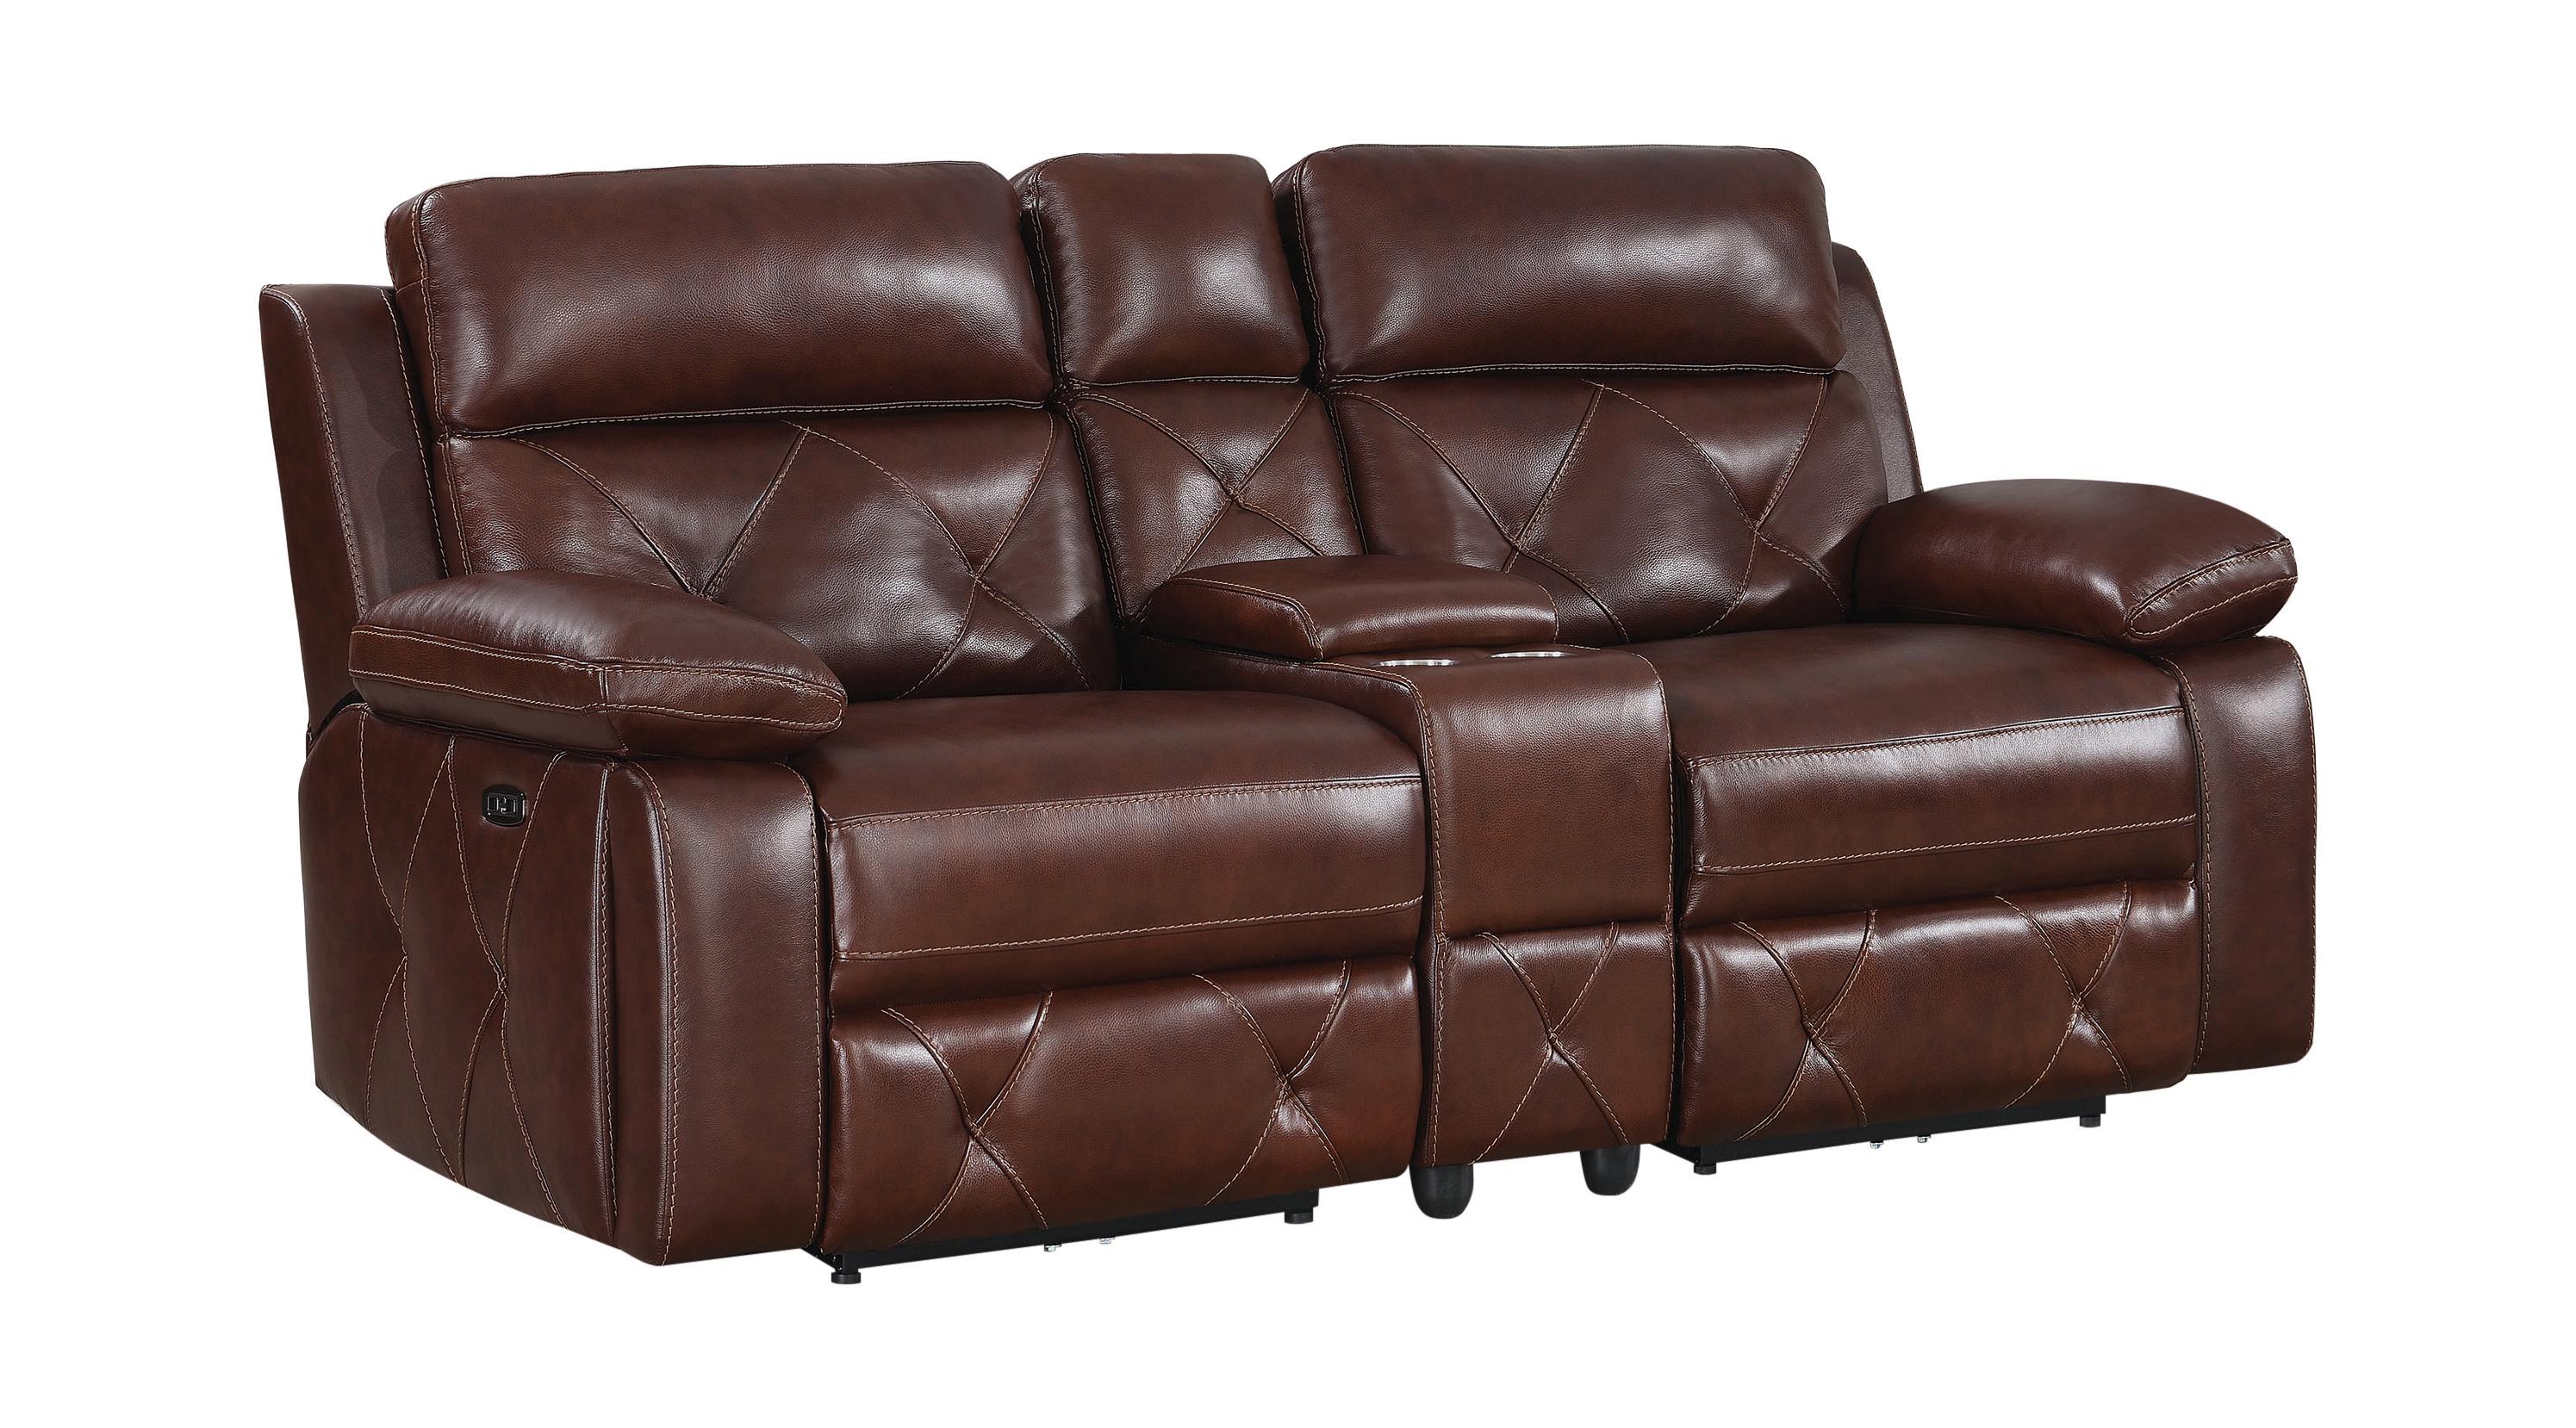 Contemporary Power Reclining Loveseat 603442PP Chester 603442PP in Chocolate Leather